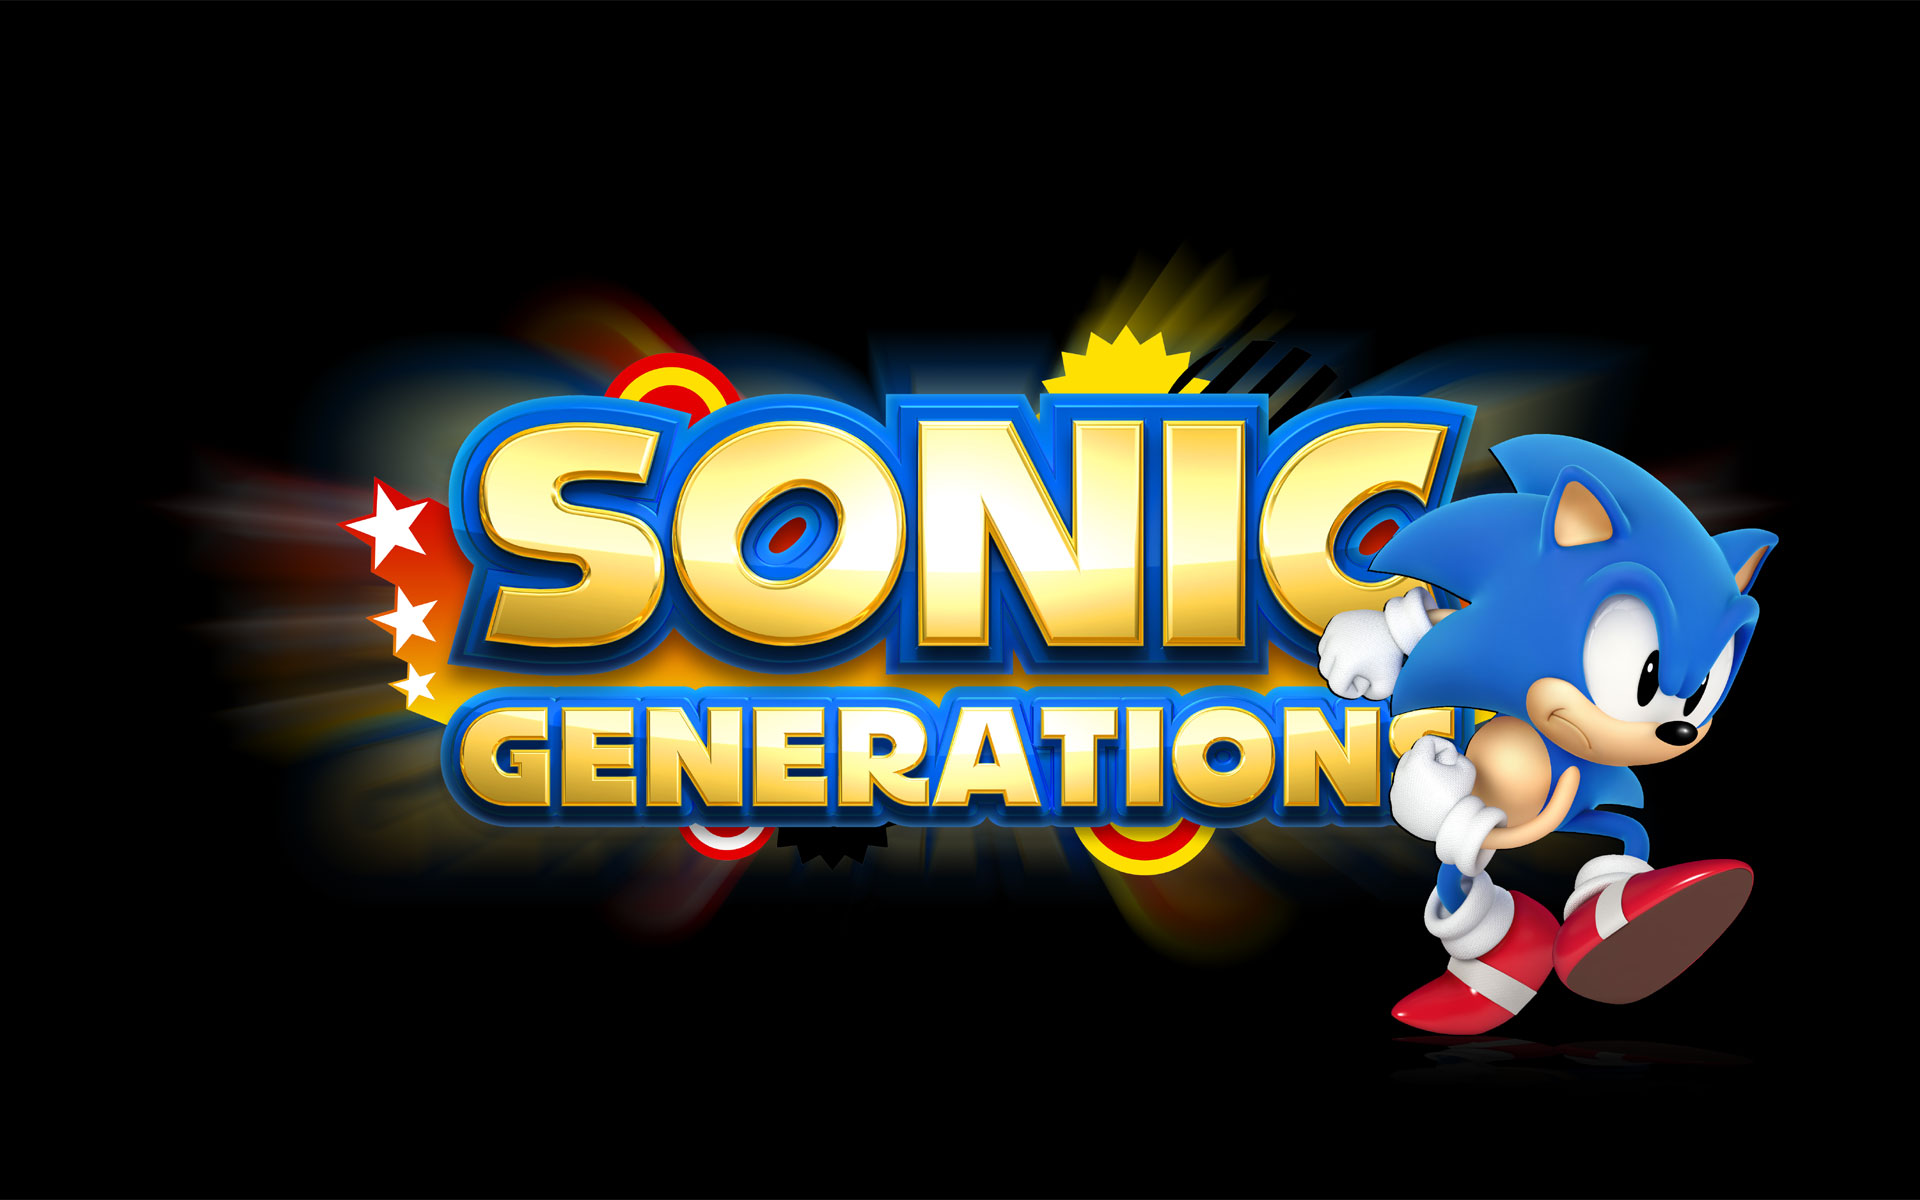 video game, sonic generations, sonic the hedgehog, sonic